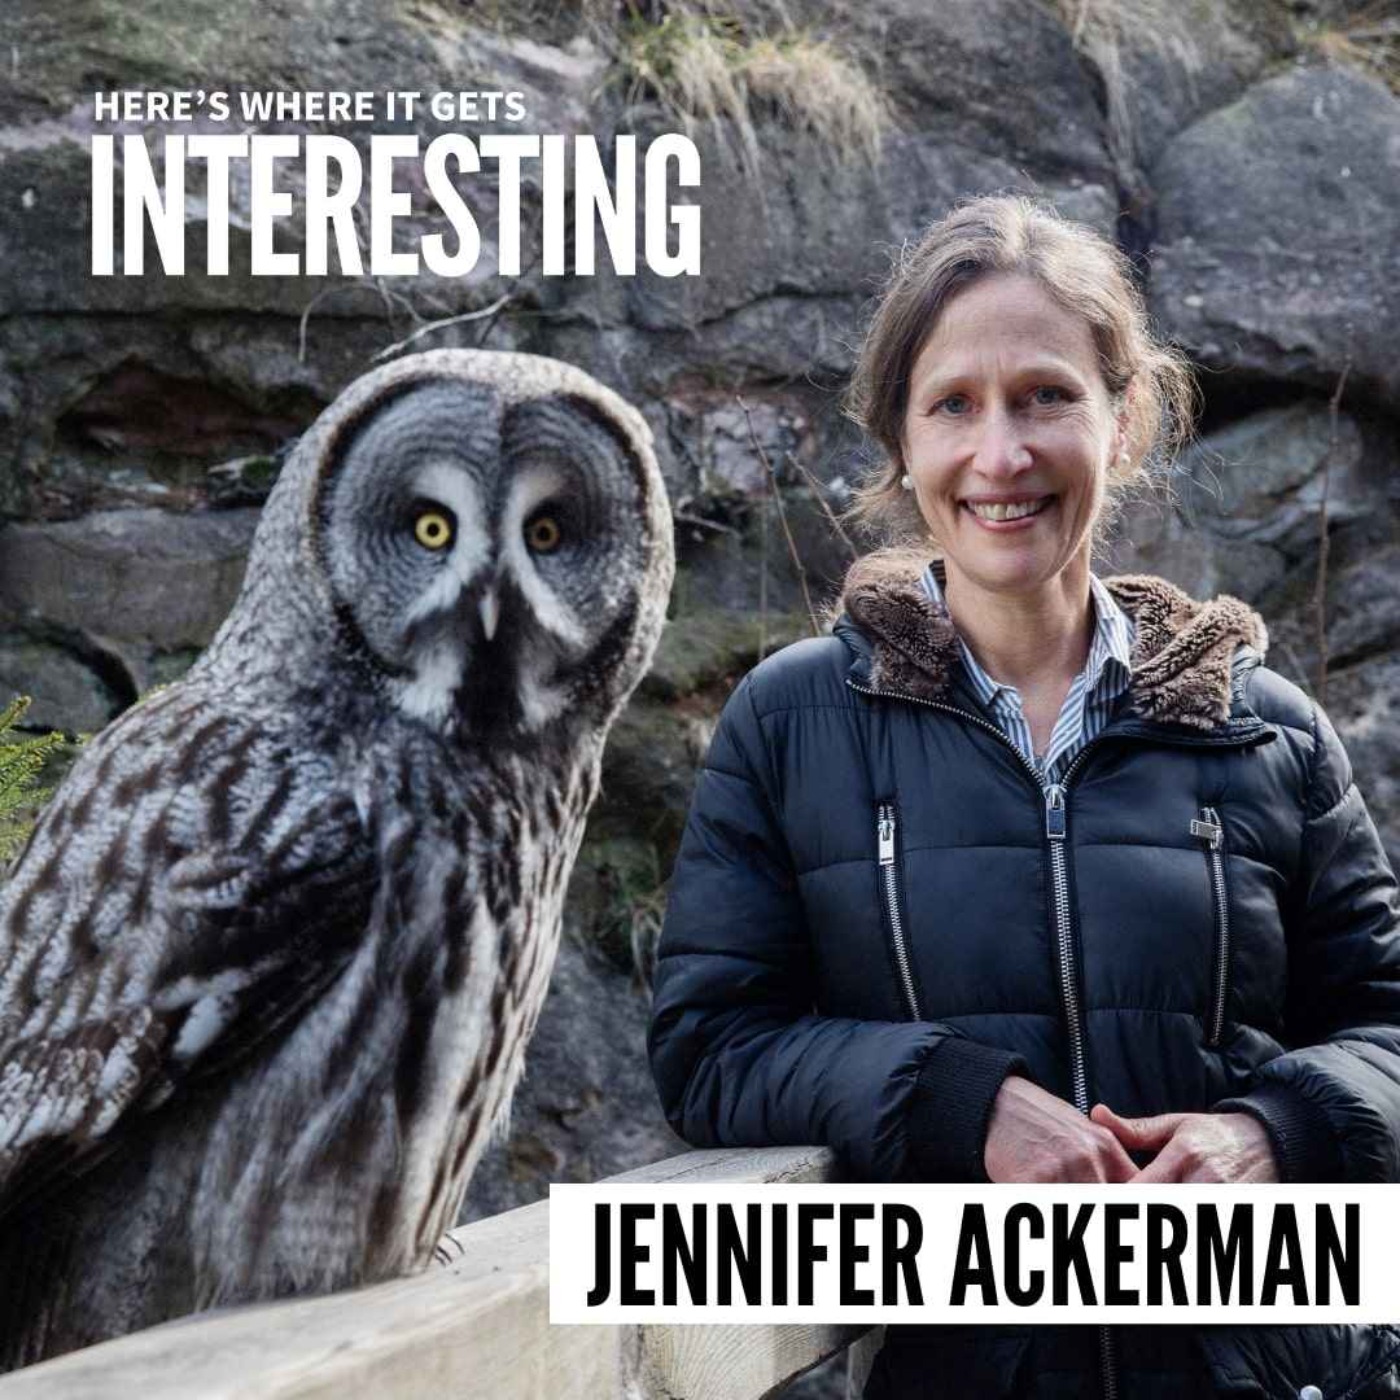 What an Owl Knows with Jennifer Ackerman